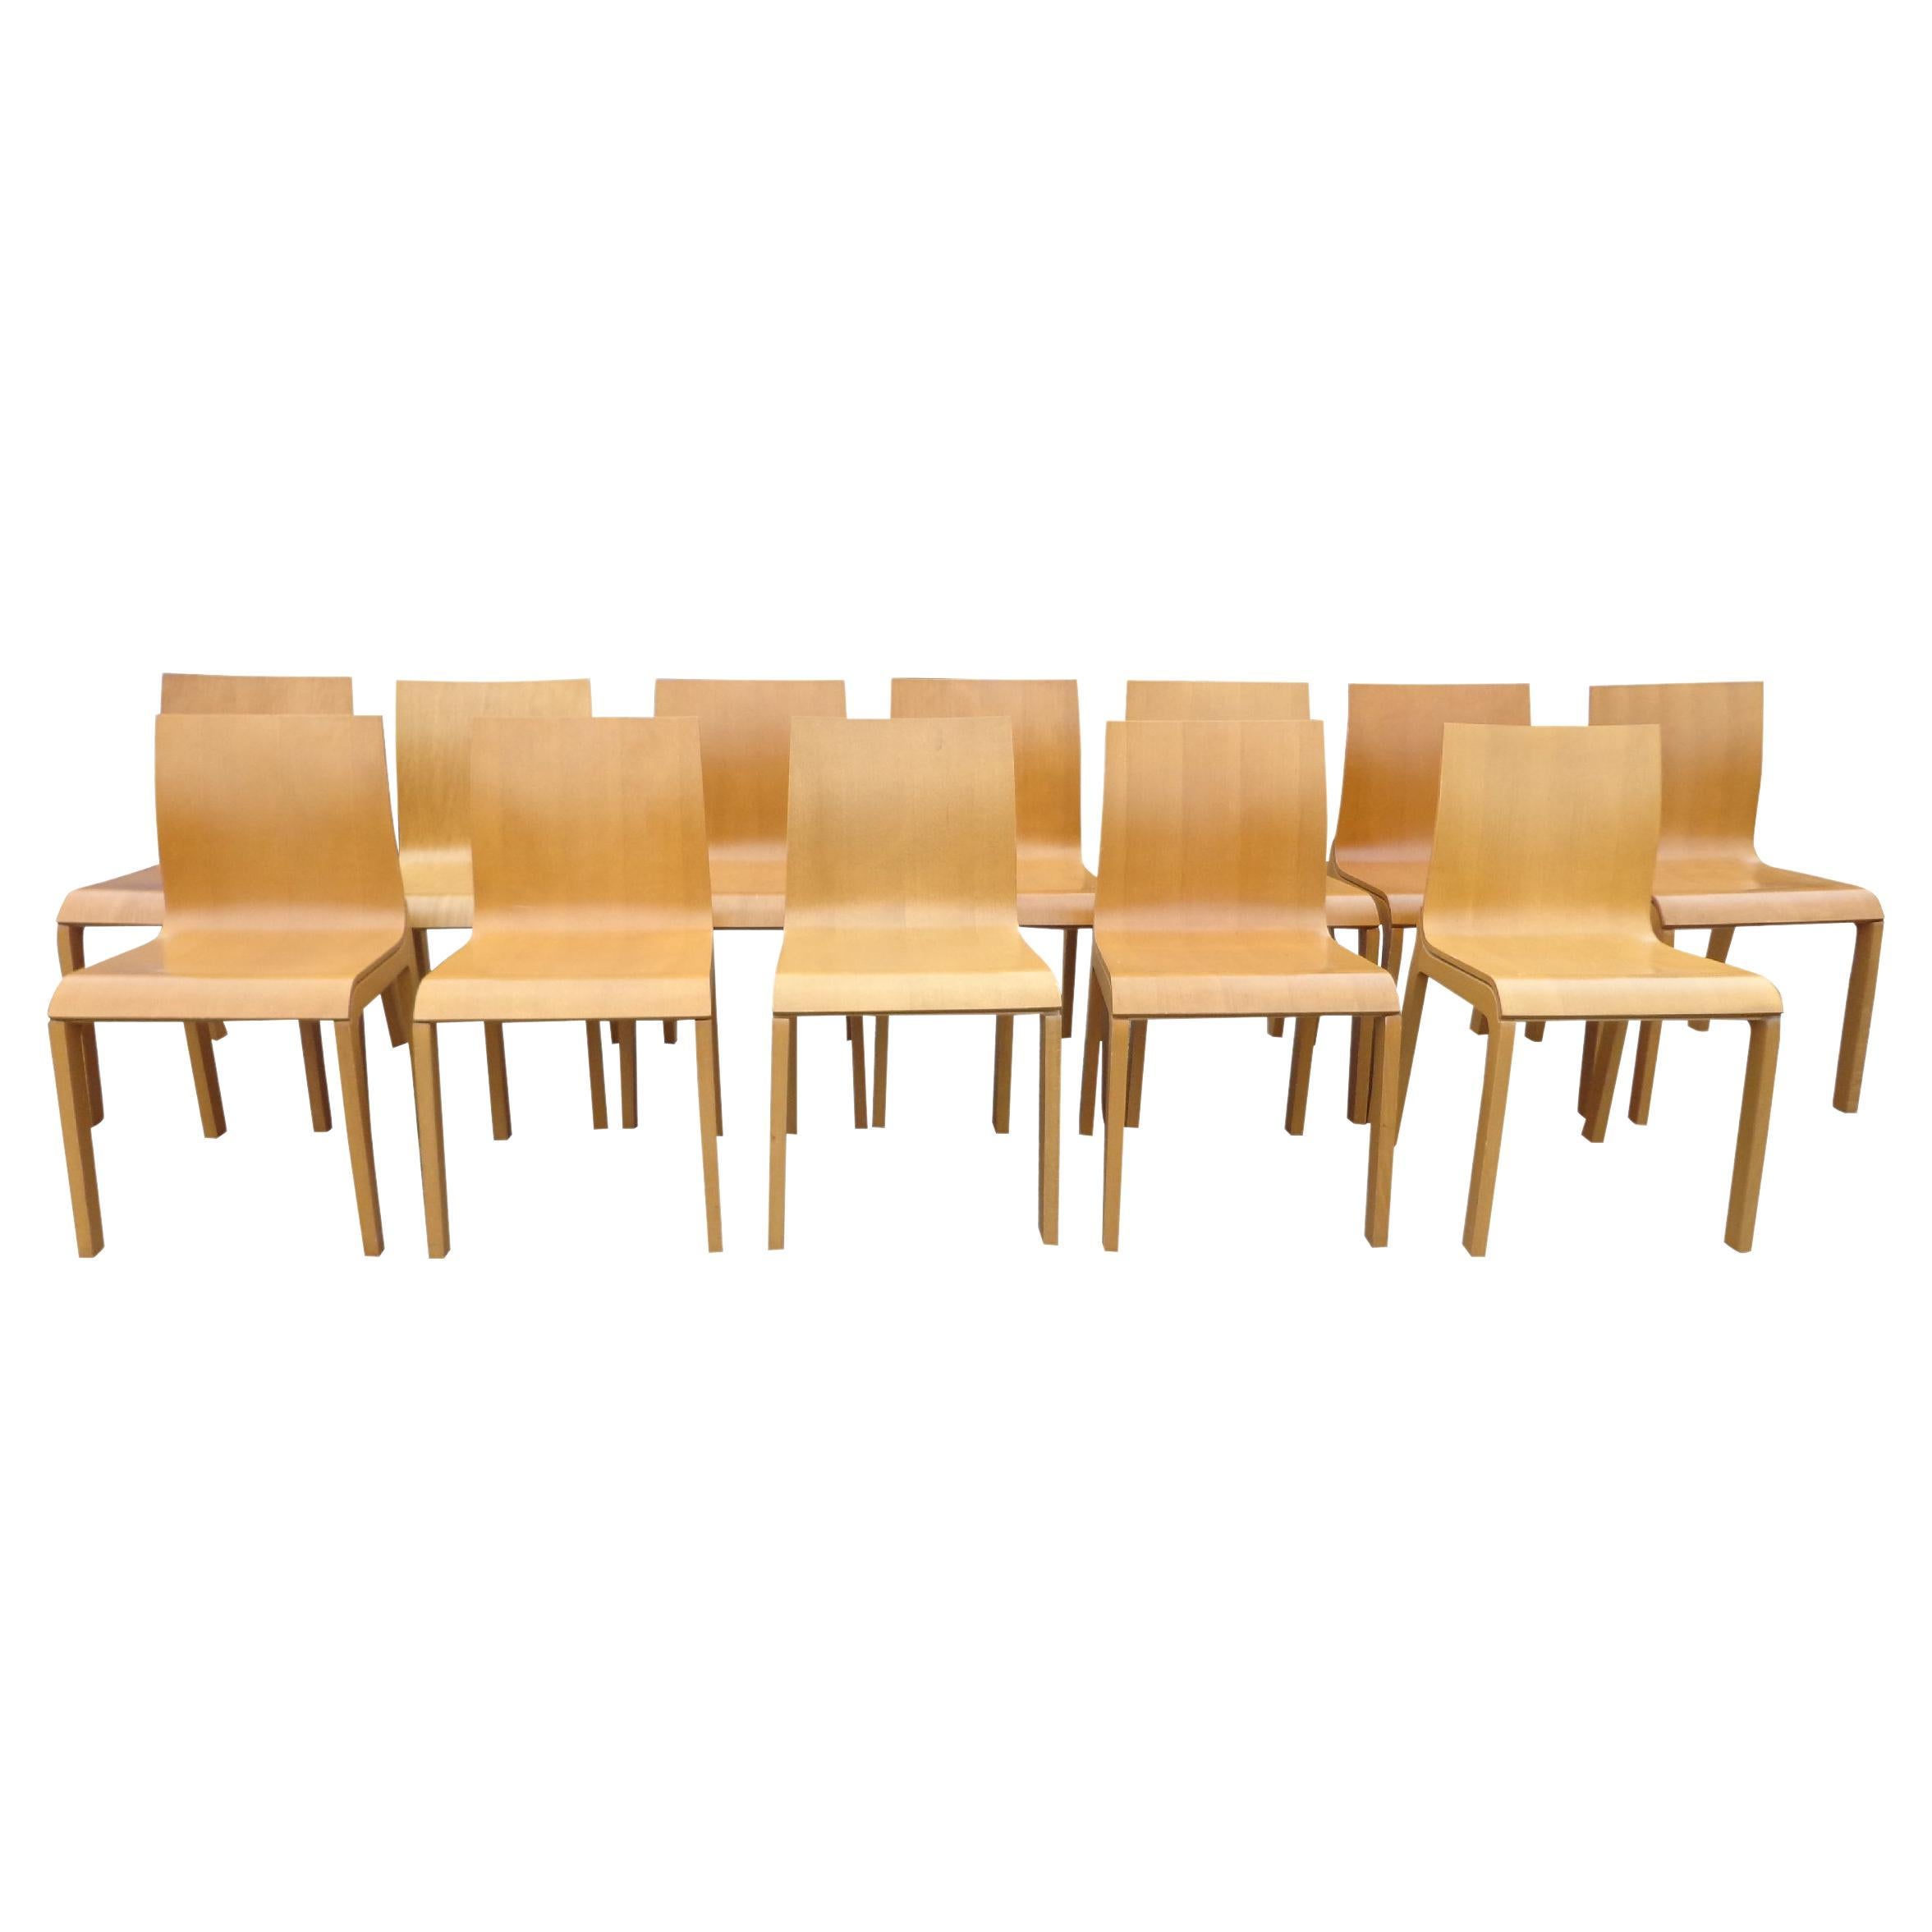 Set of 8 Italian bross beetle dining chairs by Enzo Berti

Designed by Enzo Berti, the Beetle chair offers a simple design to compliment any dining table or breakfast nook. The molded wood frame in beech adds warmth to this modern design. 
Marked